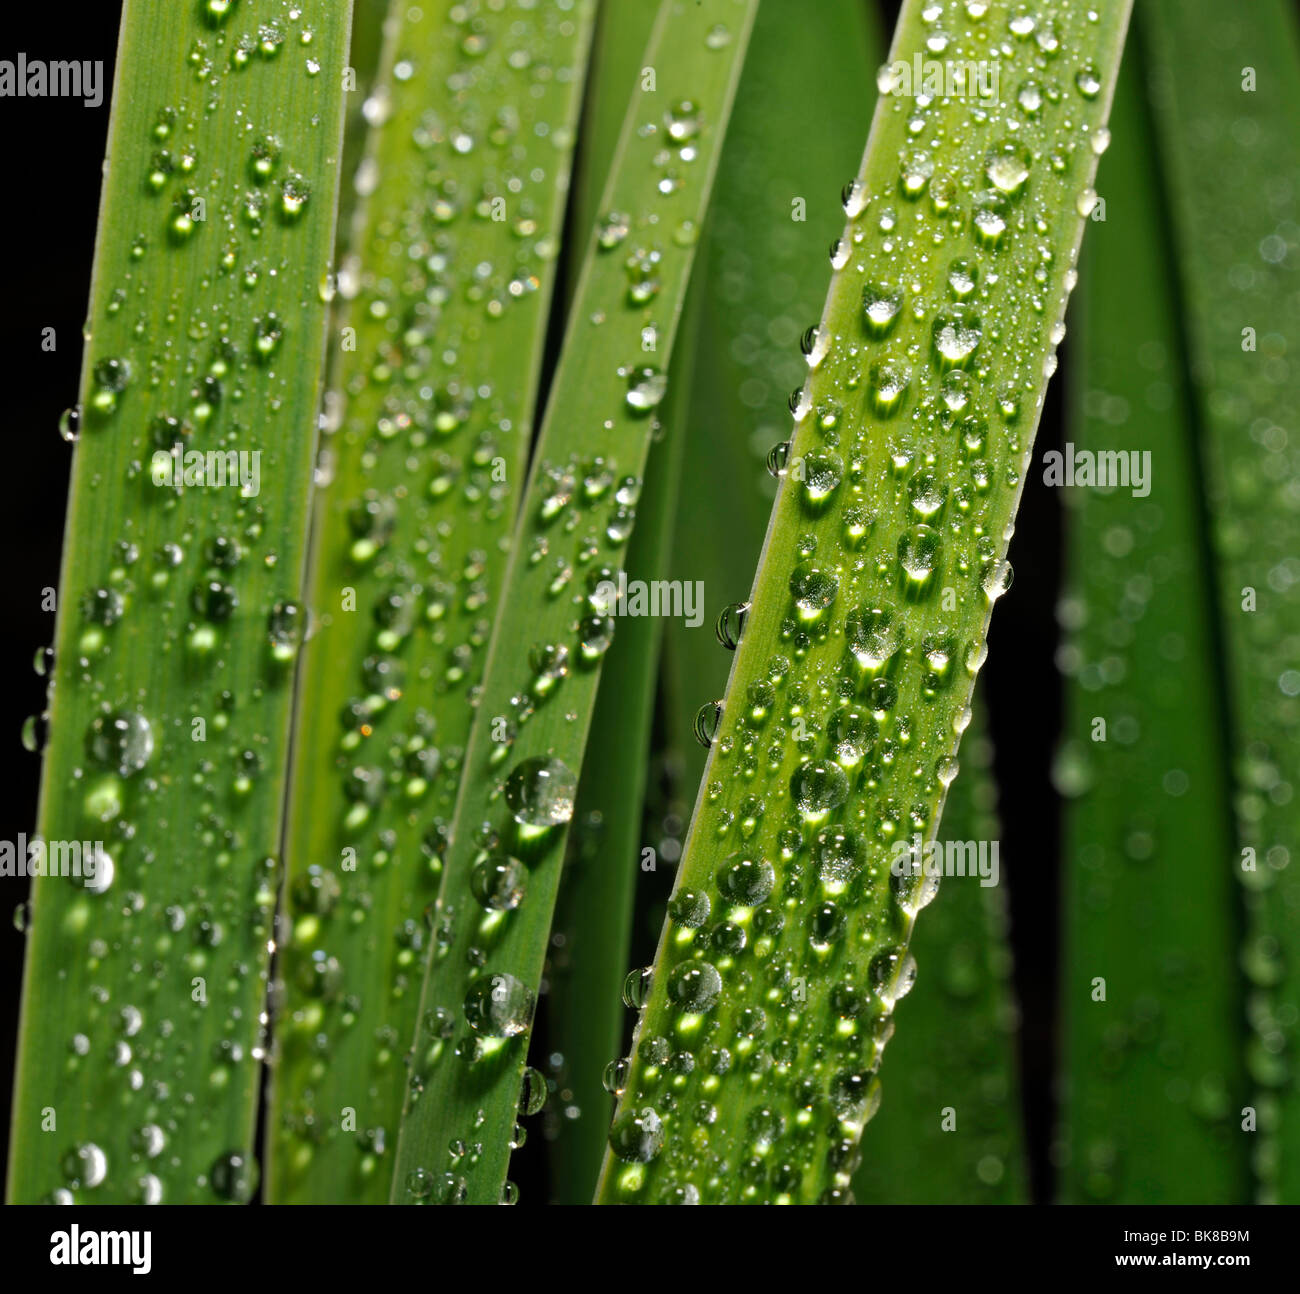 Leaves with dew drops Stock Photo